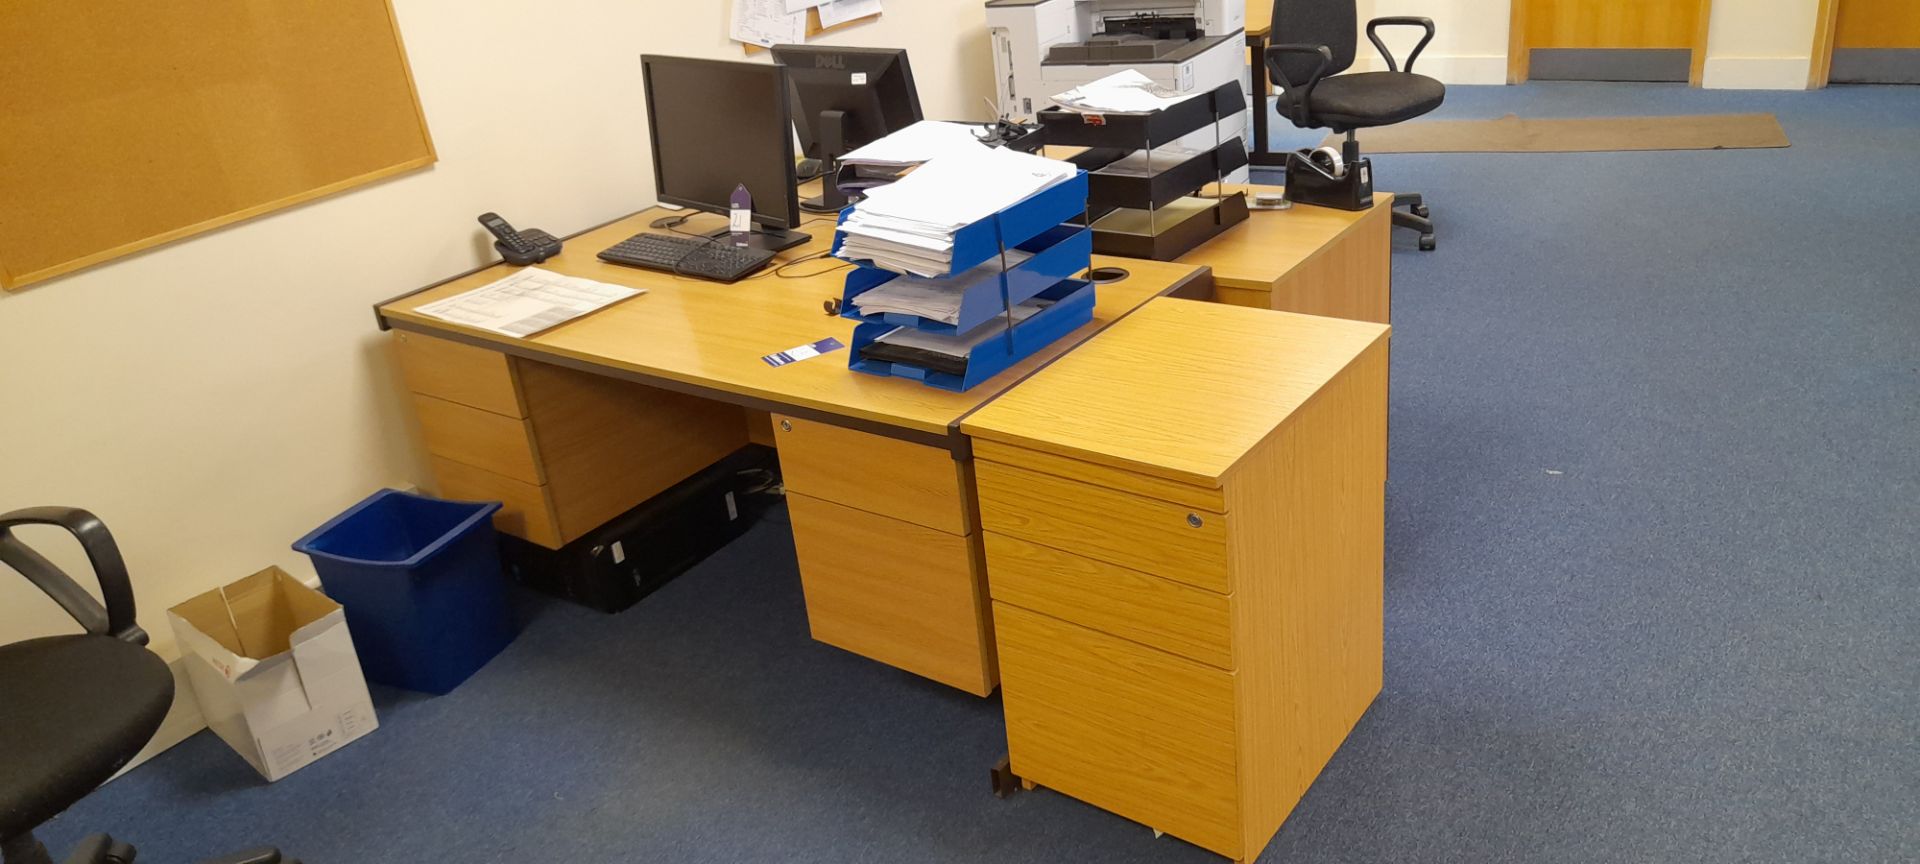 2x Straight edge cantilever office desk with inbuilt drawers and 2x mobile pedestals - Image 3 of 3